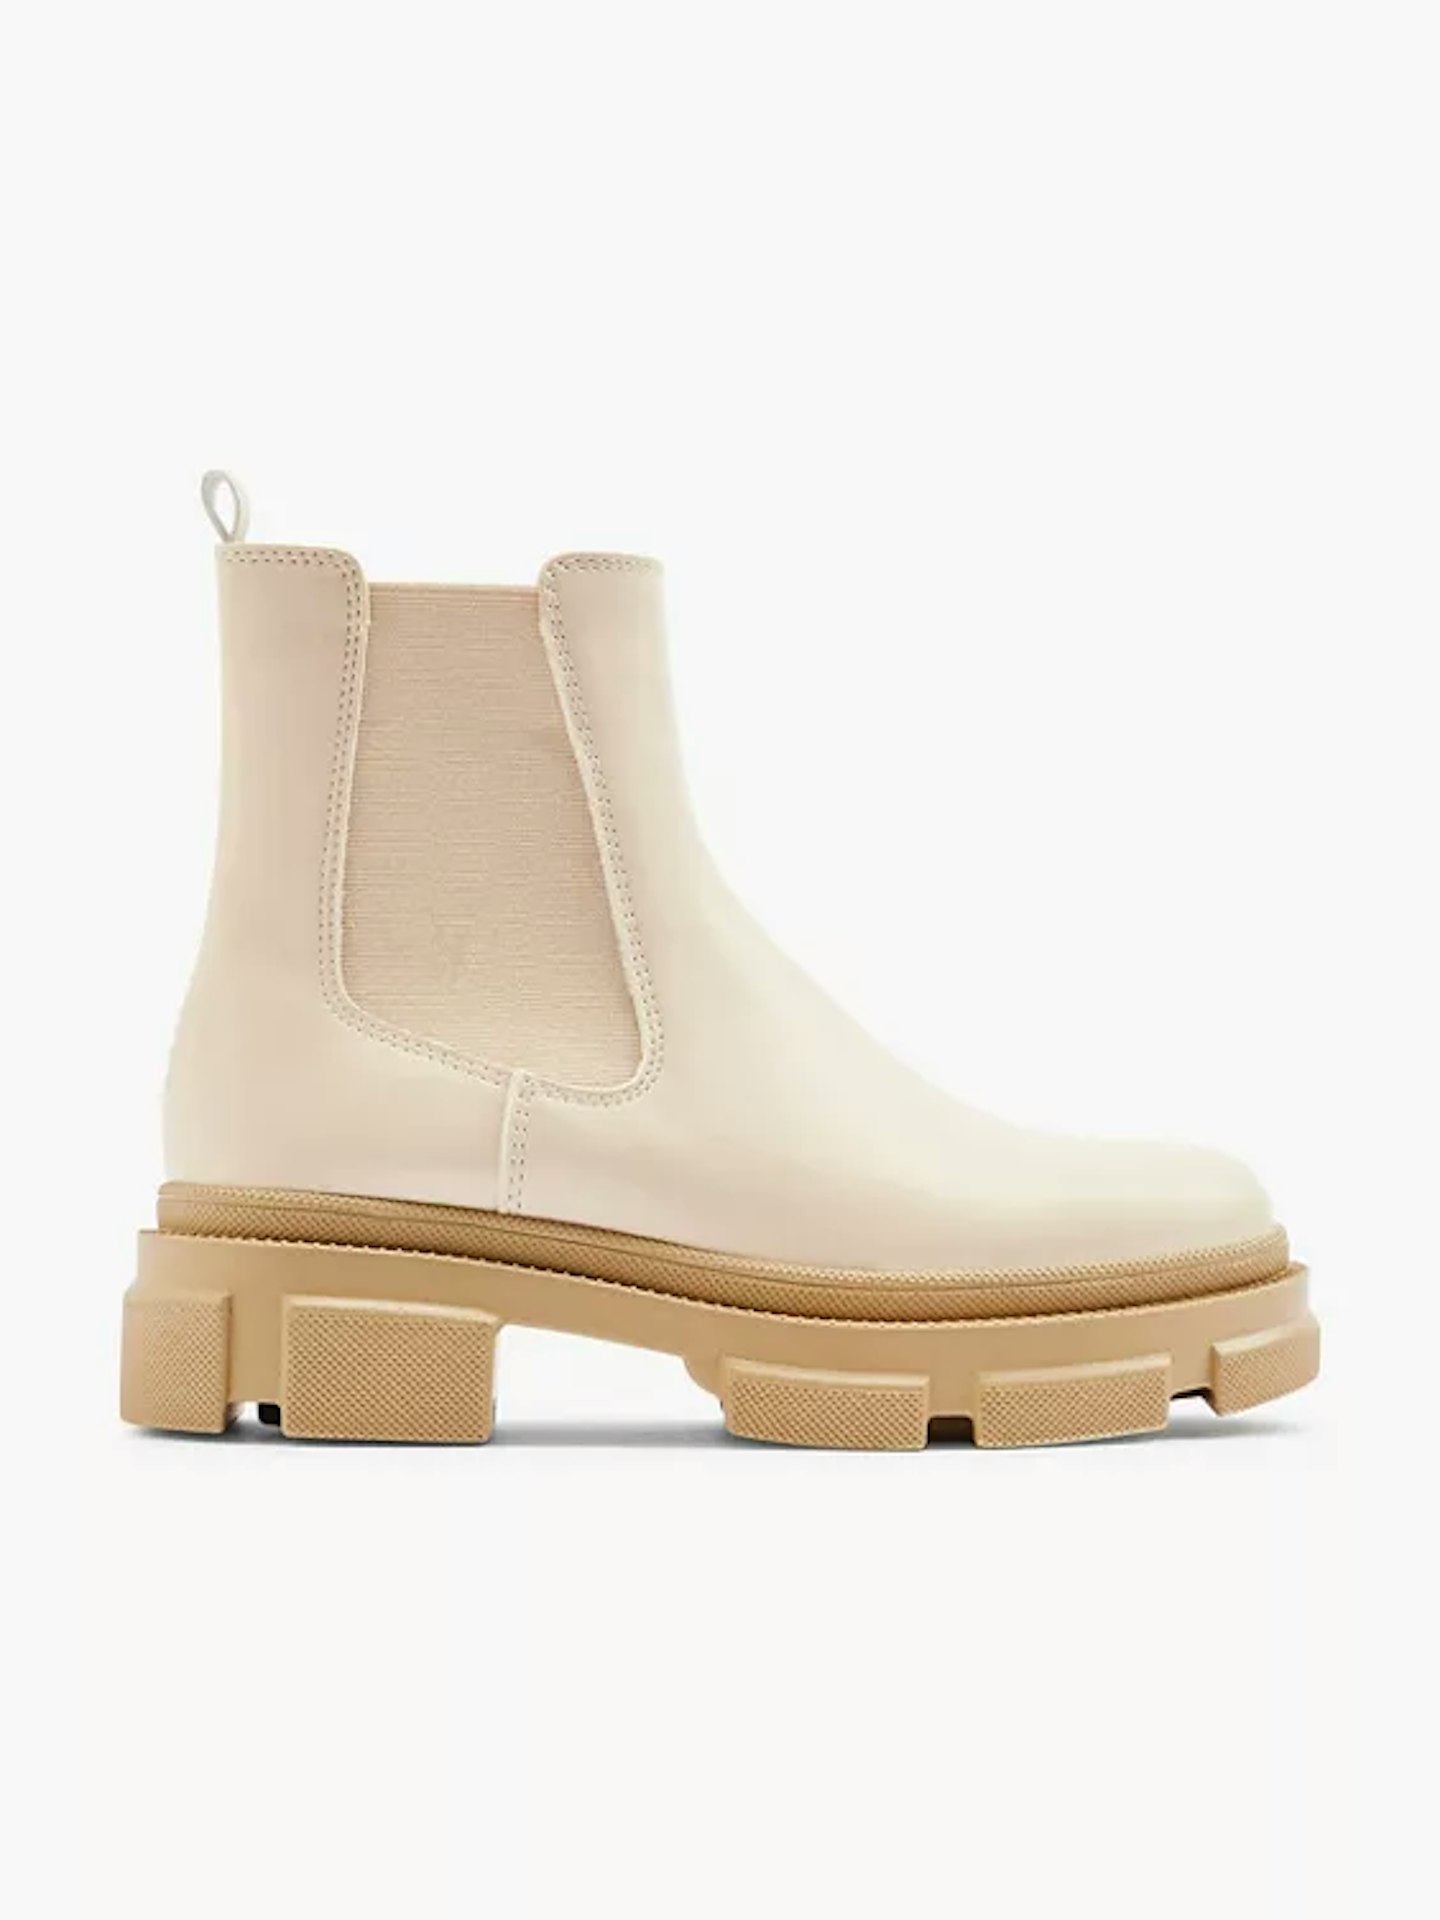 These High Street Boots Are Some Of The Best This Season